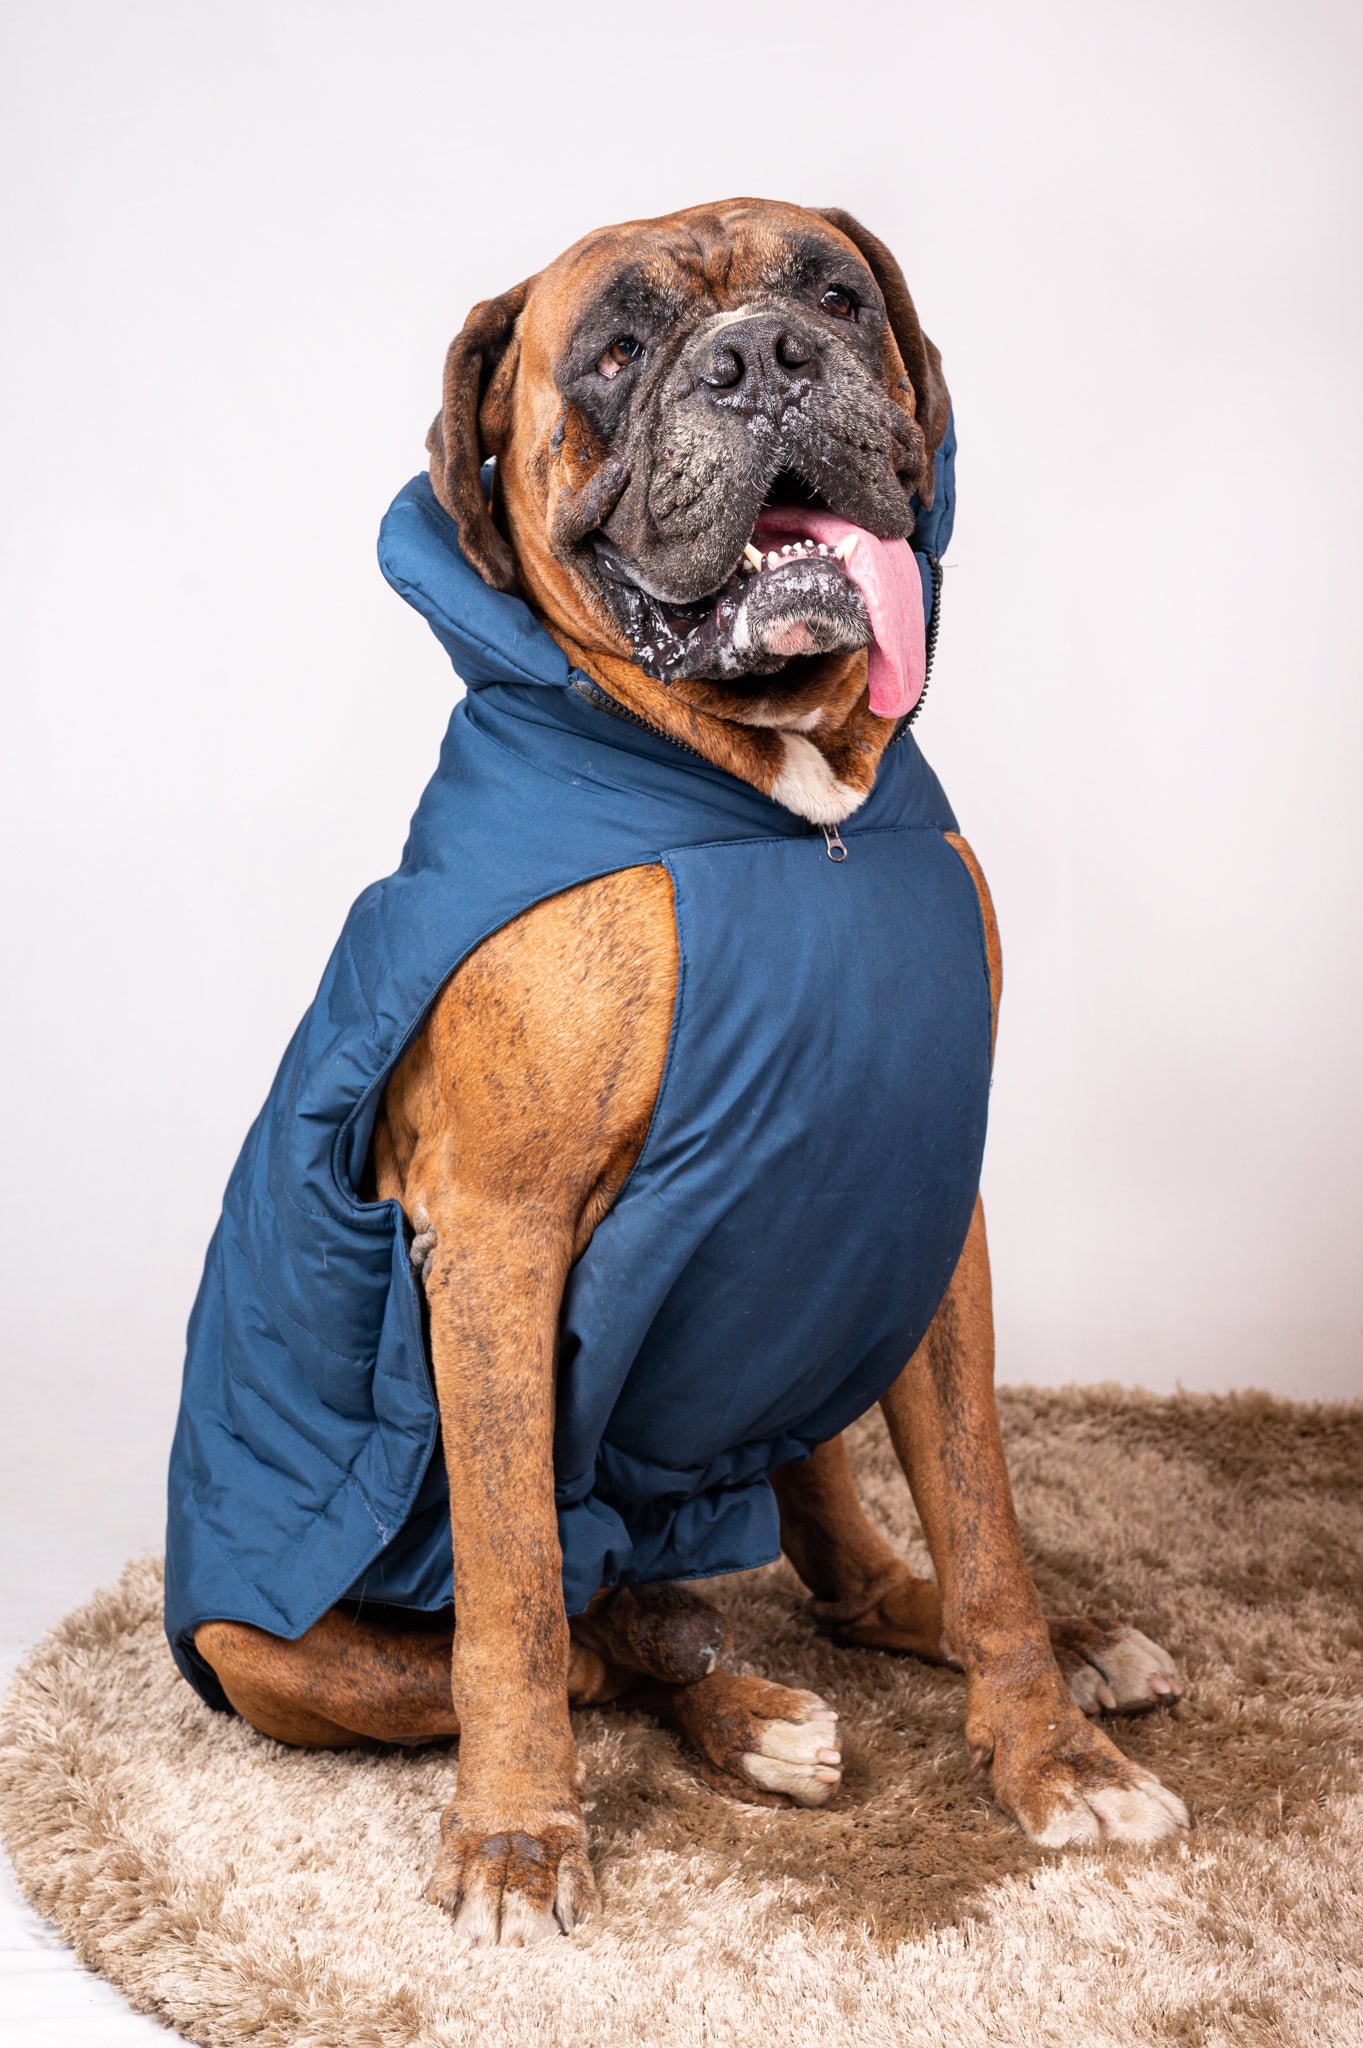 Pet Snugs Water-Resistant Top & Soft Cotton Lining Jacket For Your Furry Friend Blue